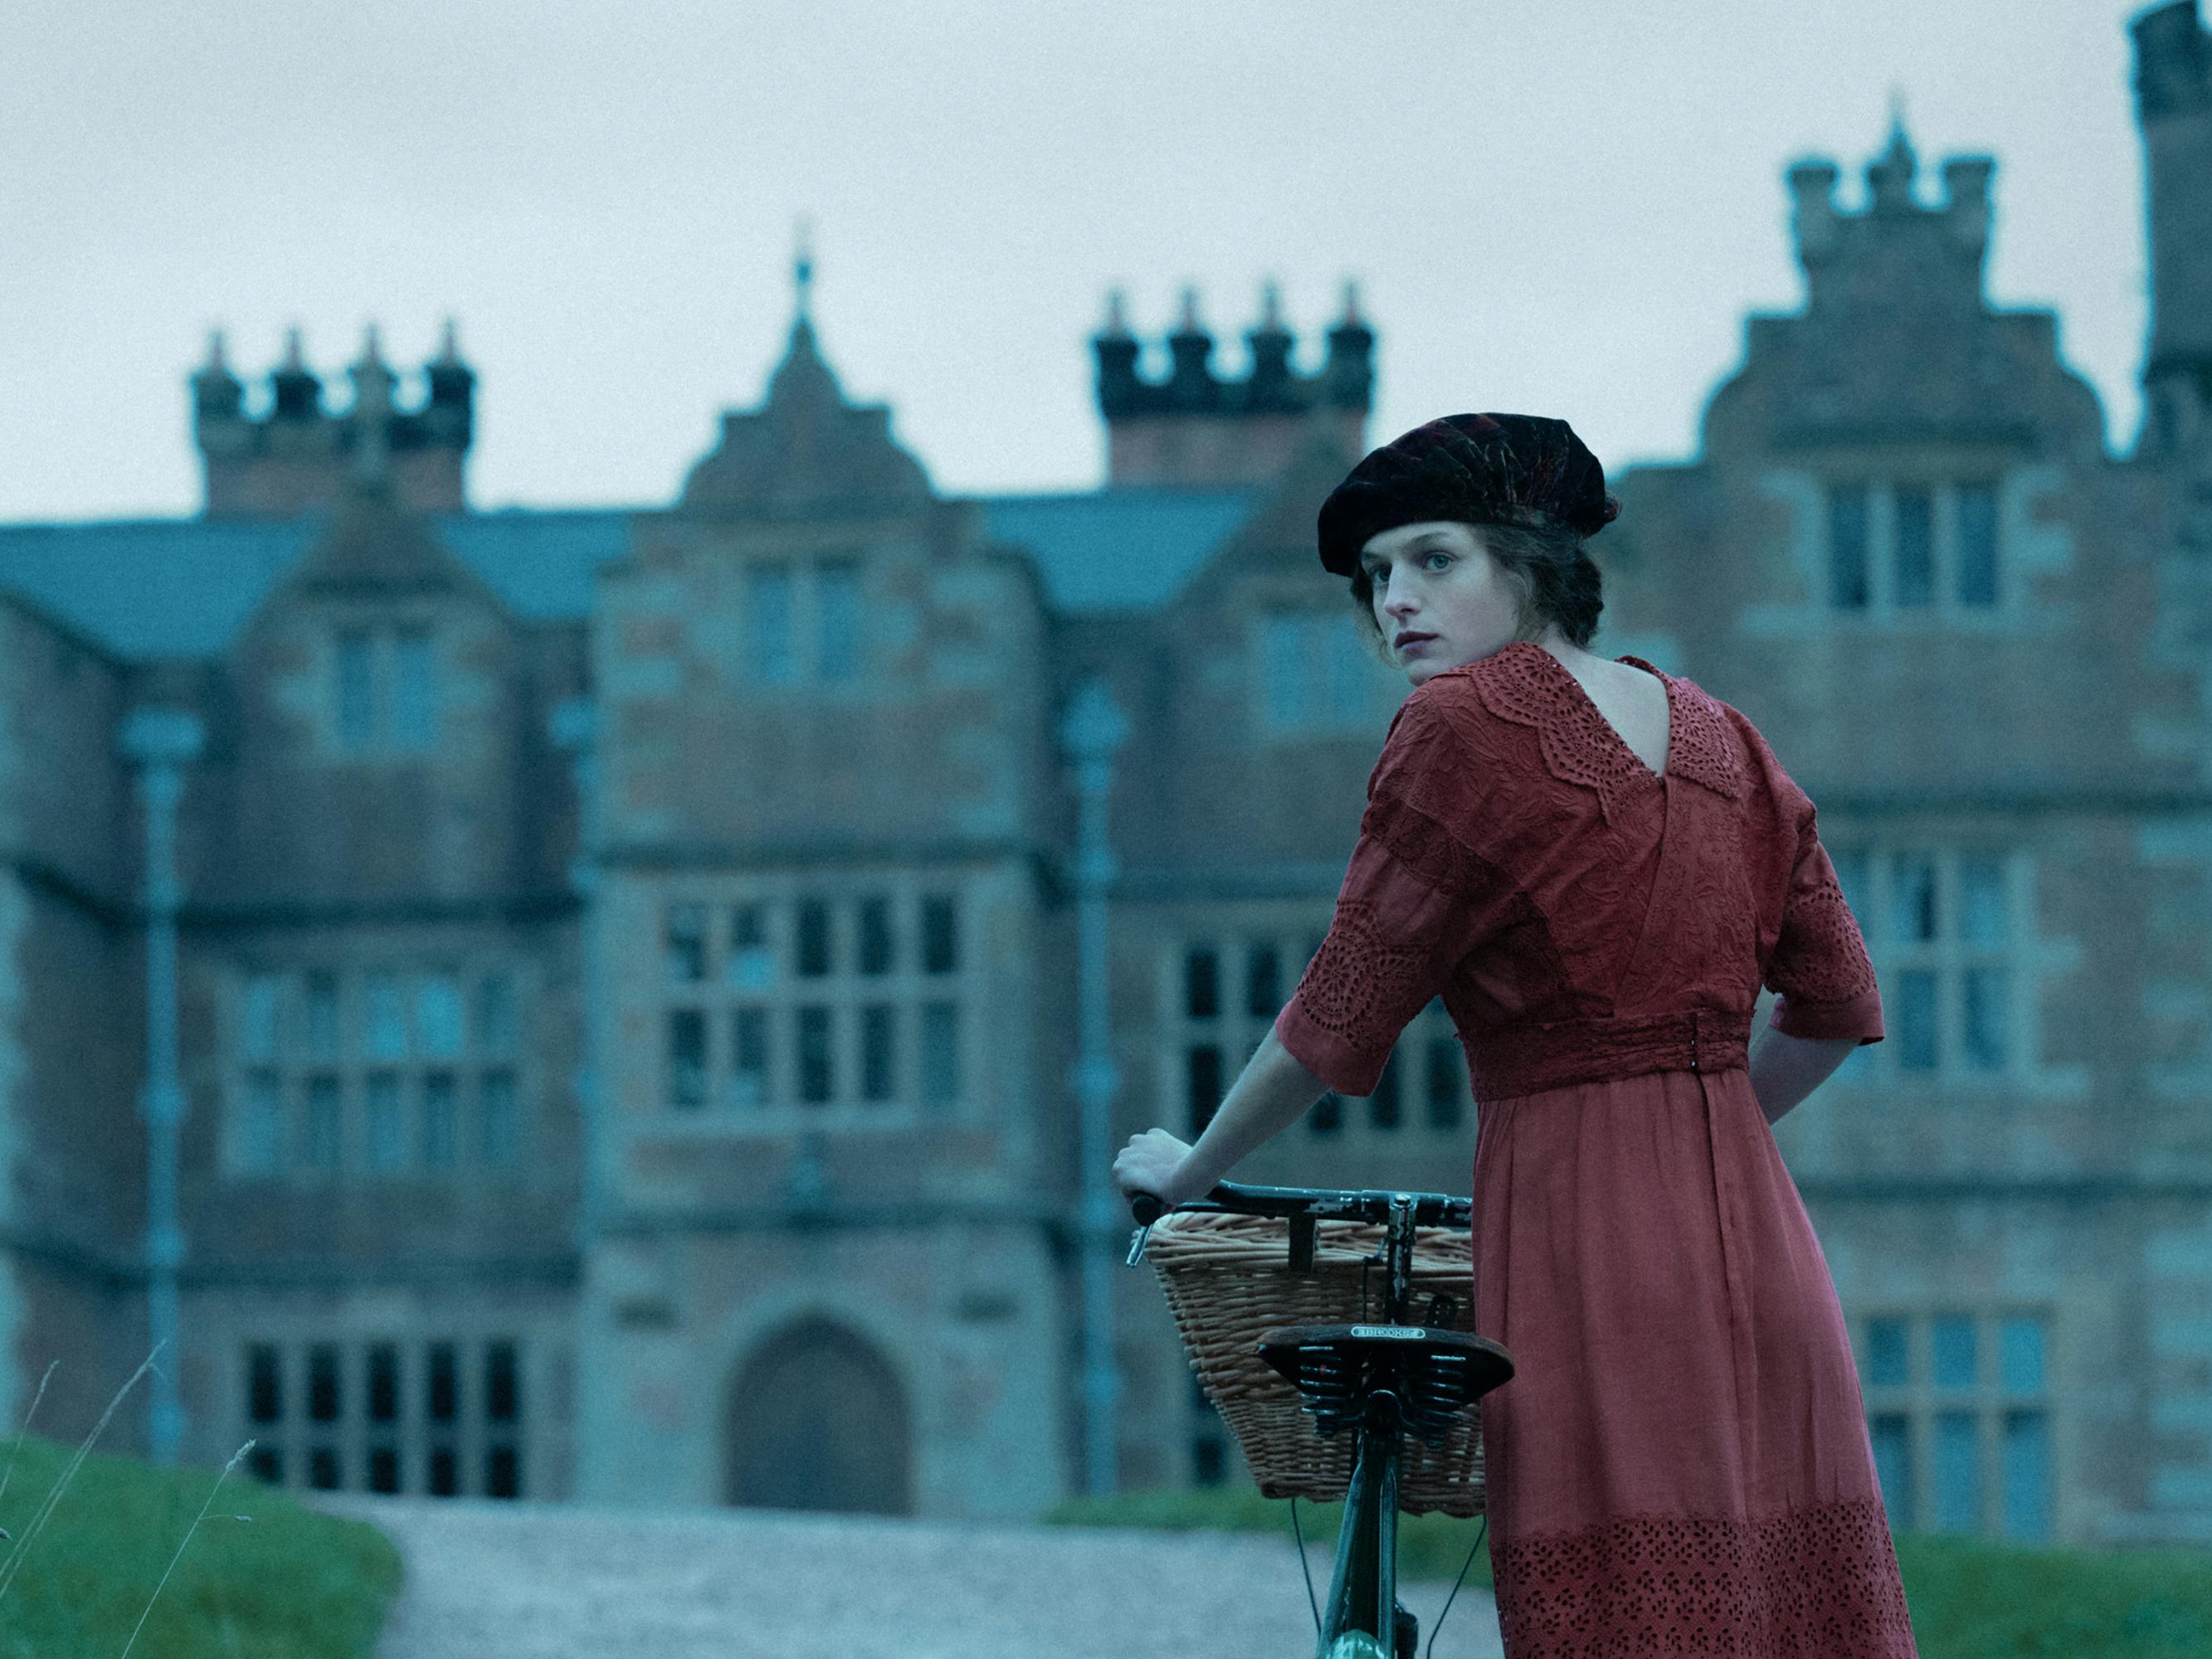 Lady Chatterley (Emma Corrin) wears a red dress and brings her bike up to her estate.